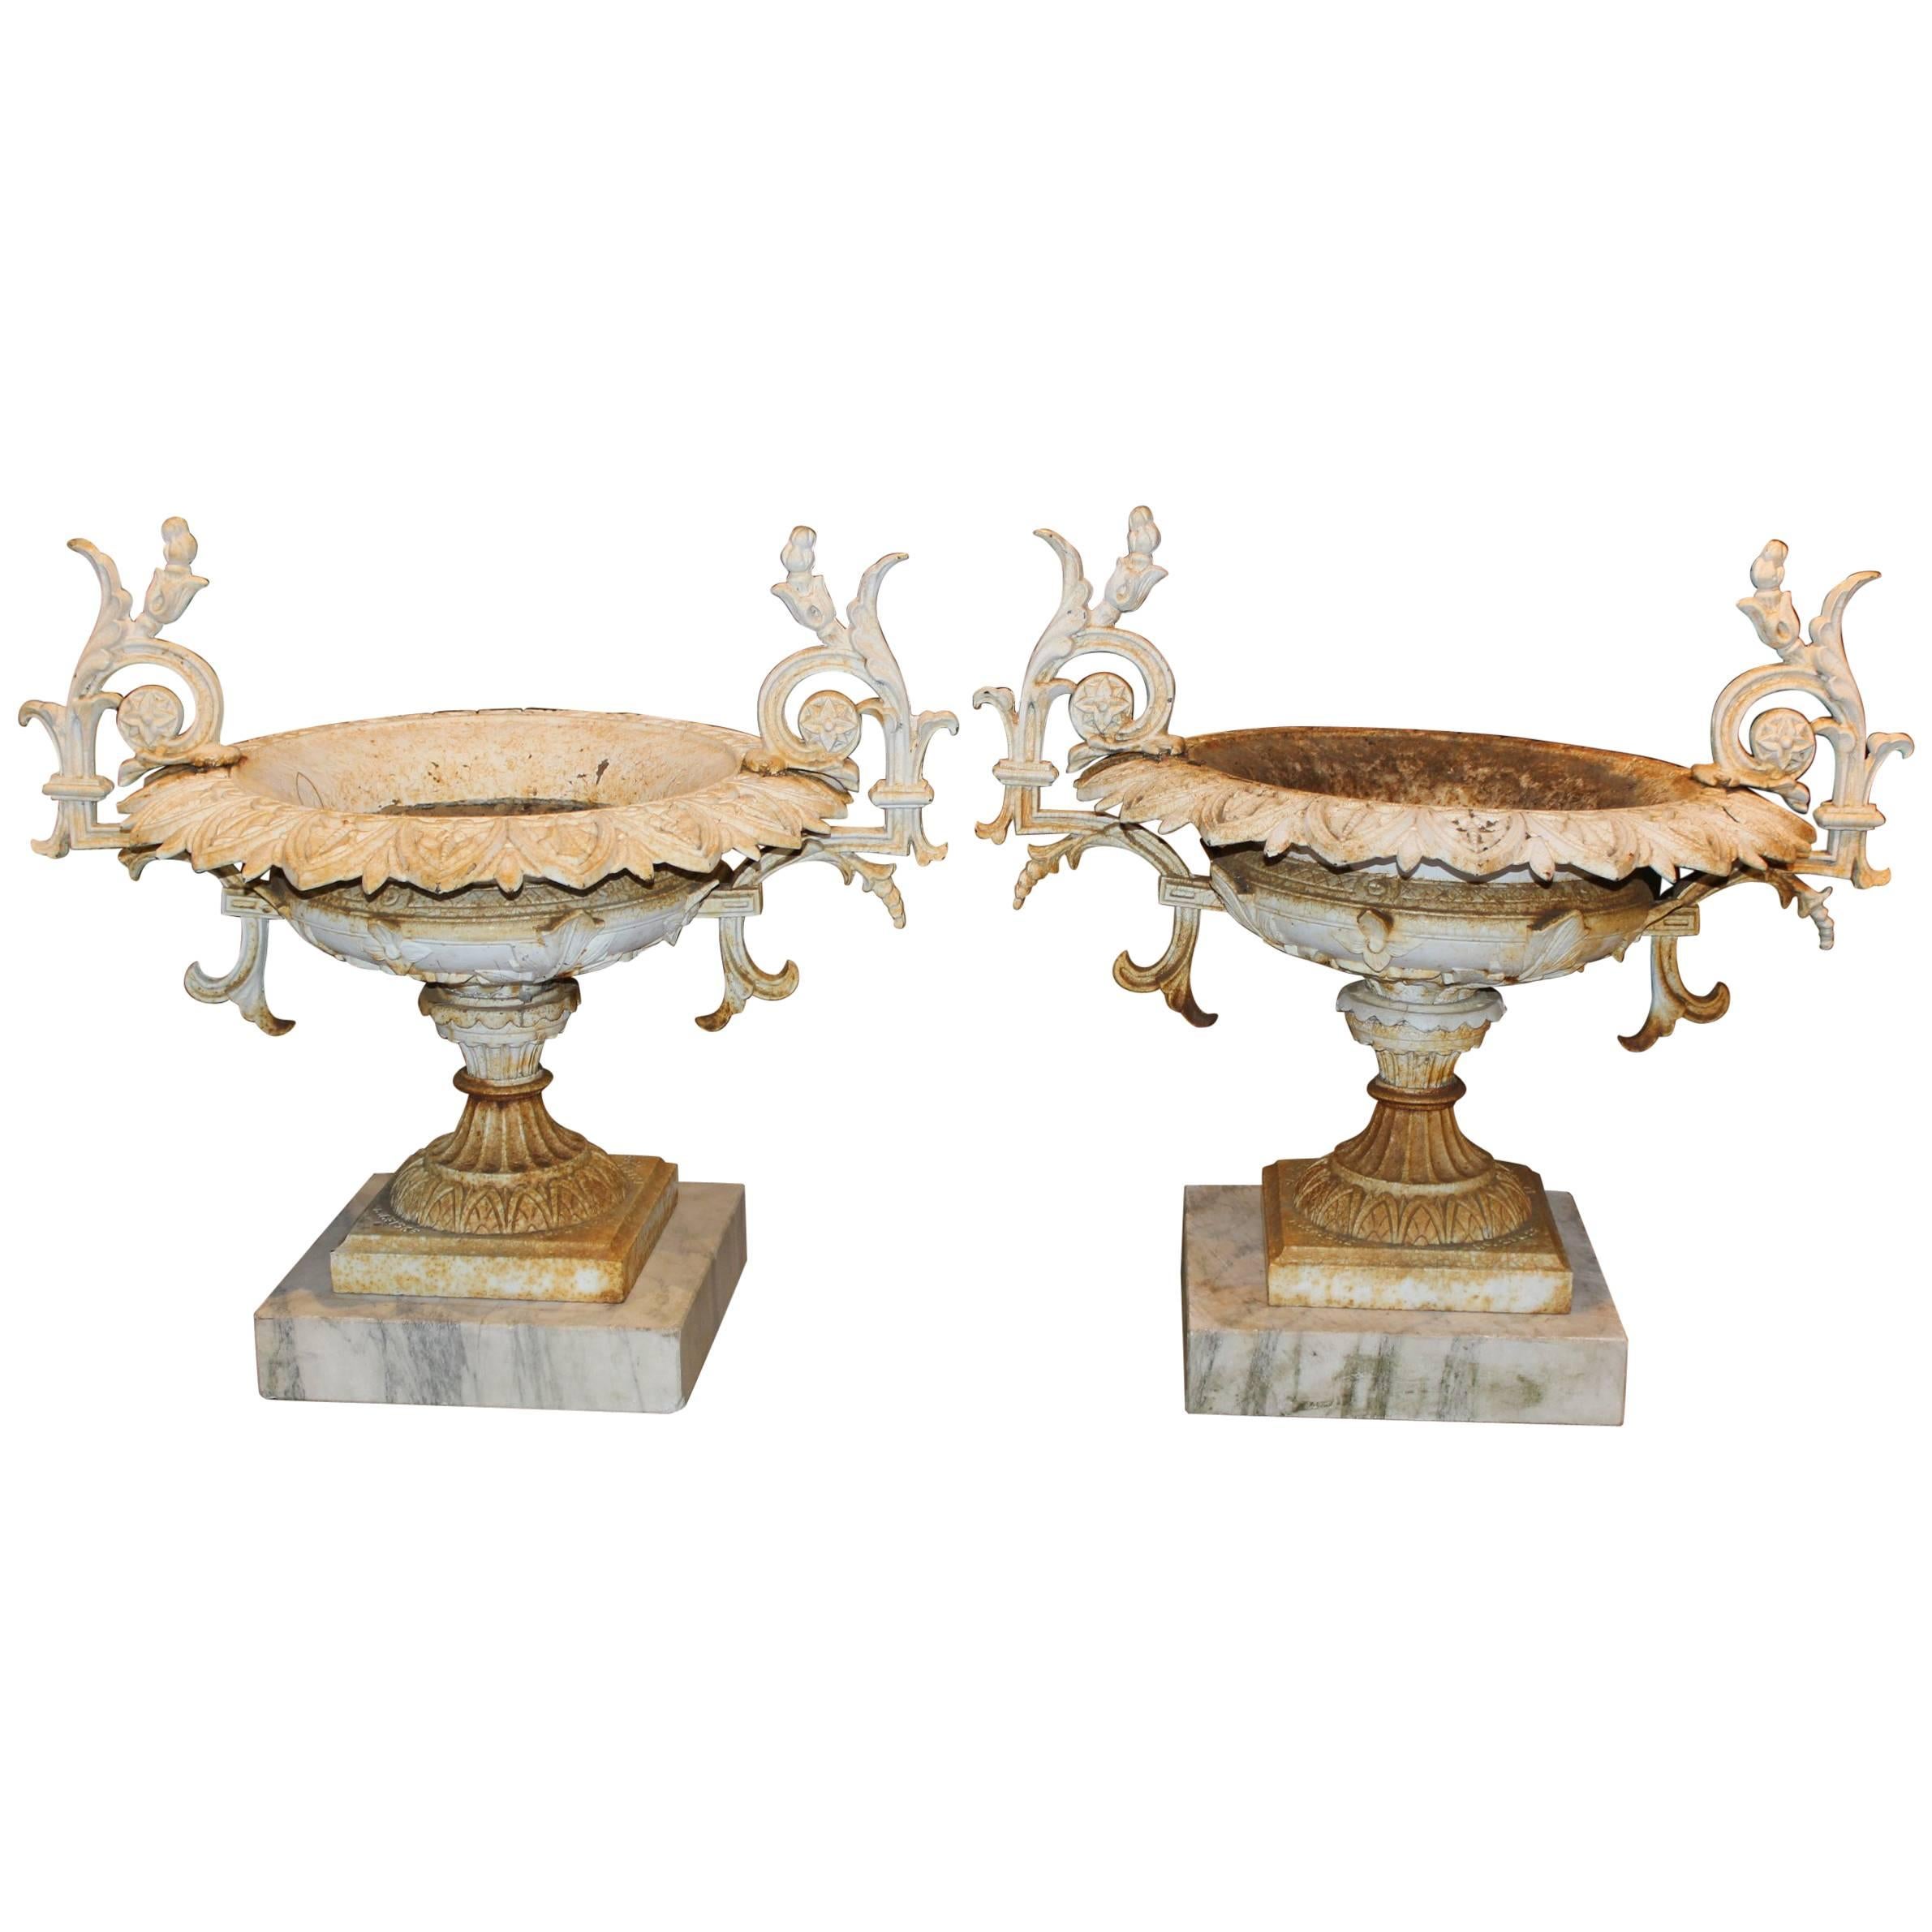 Pair of J.W. Fiske NY Signed Victorian Iron Urns on Marble Bases, circa 1874